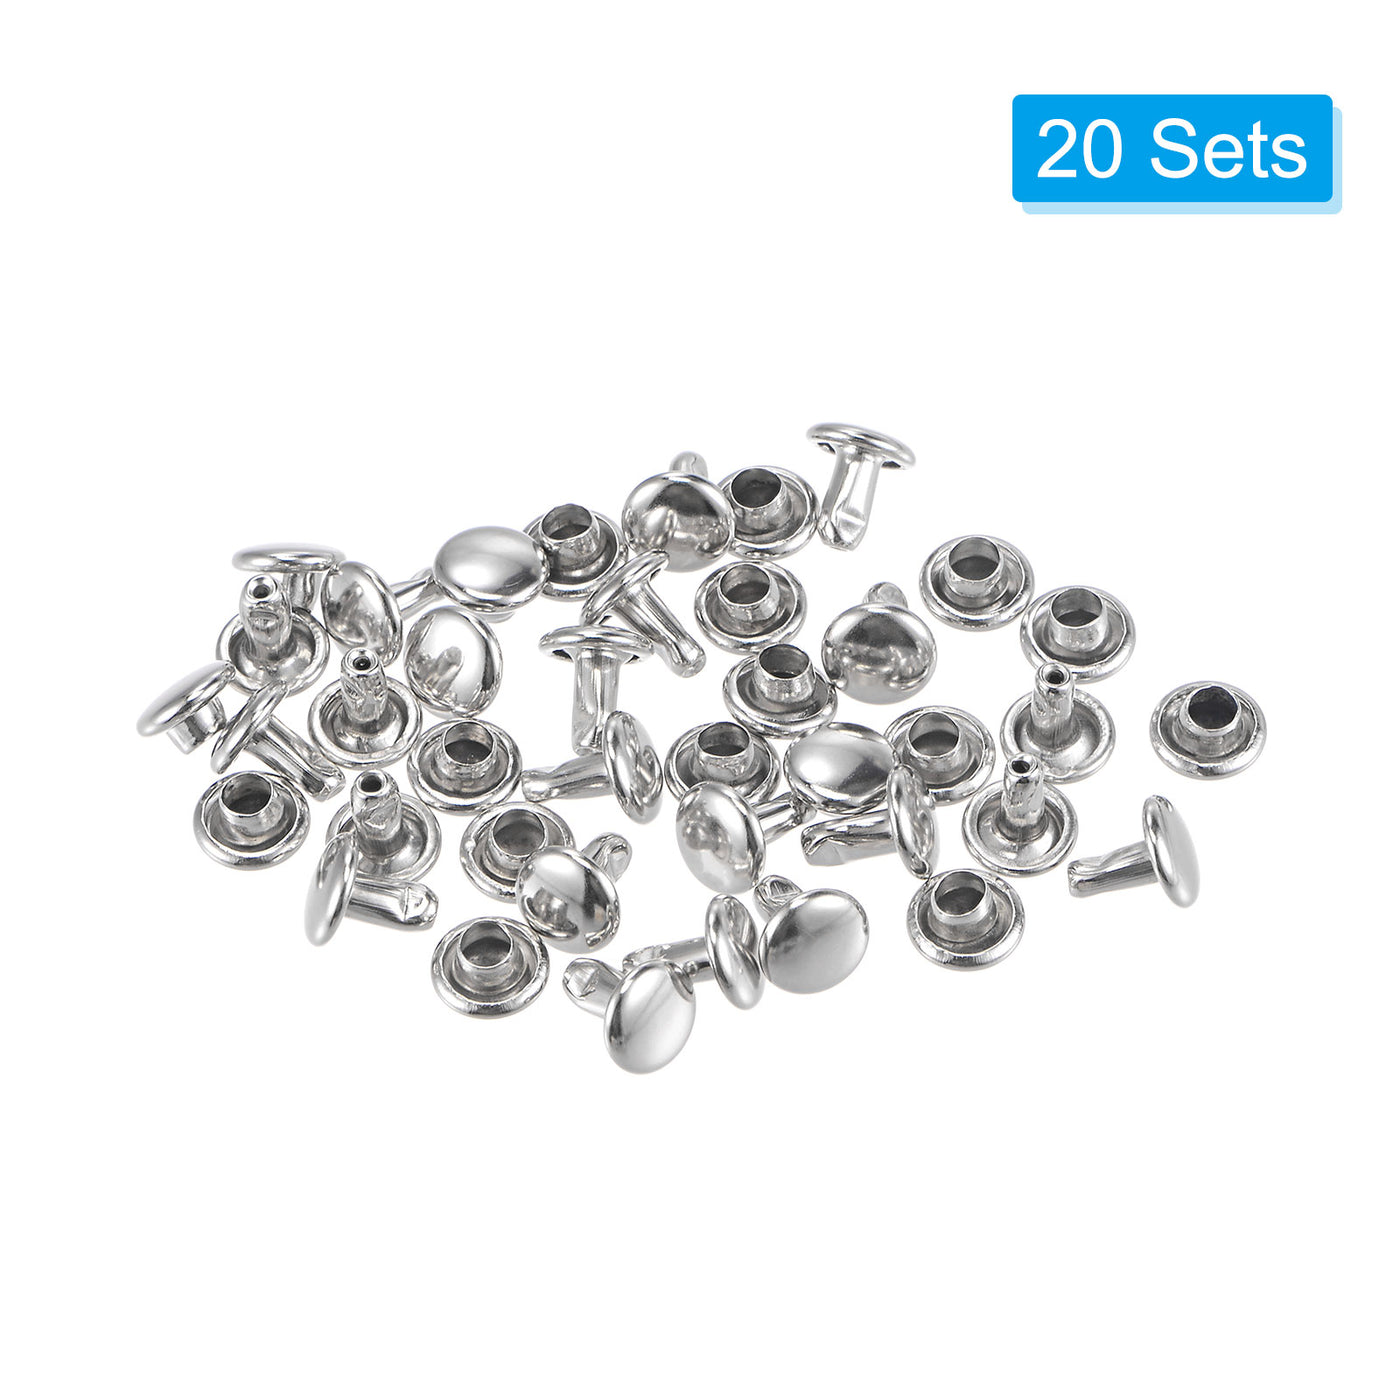 uxcell Uxcell 20 Sets Leather Rivets Silver Tone 6mm Double Cap Brass Rivet Leather Studs